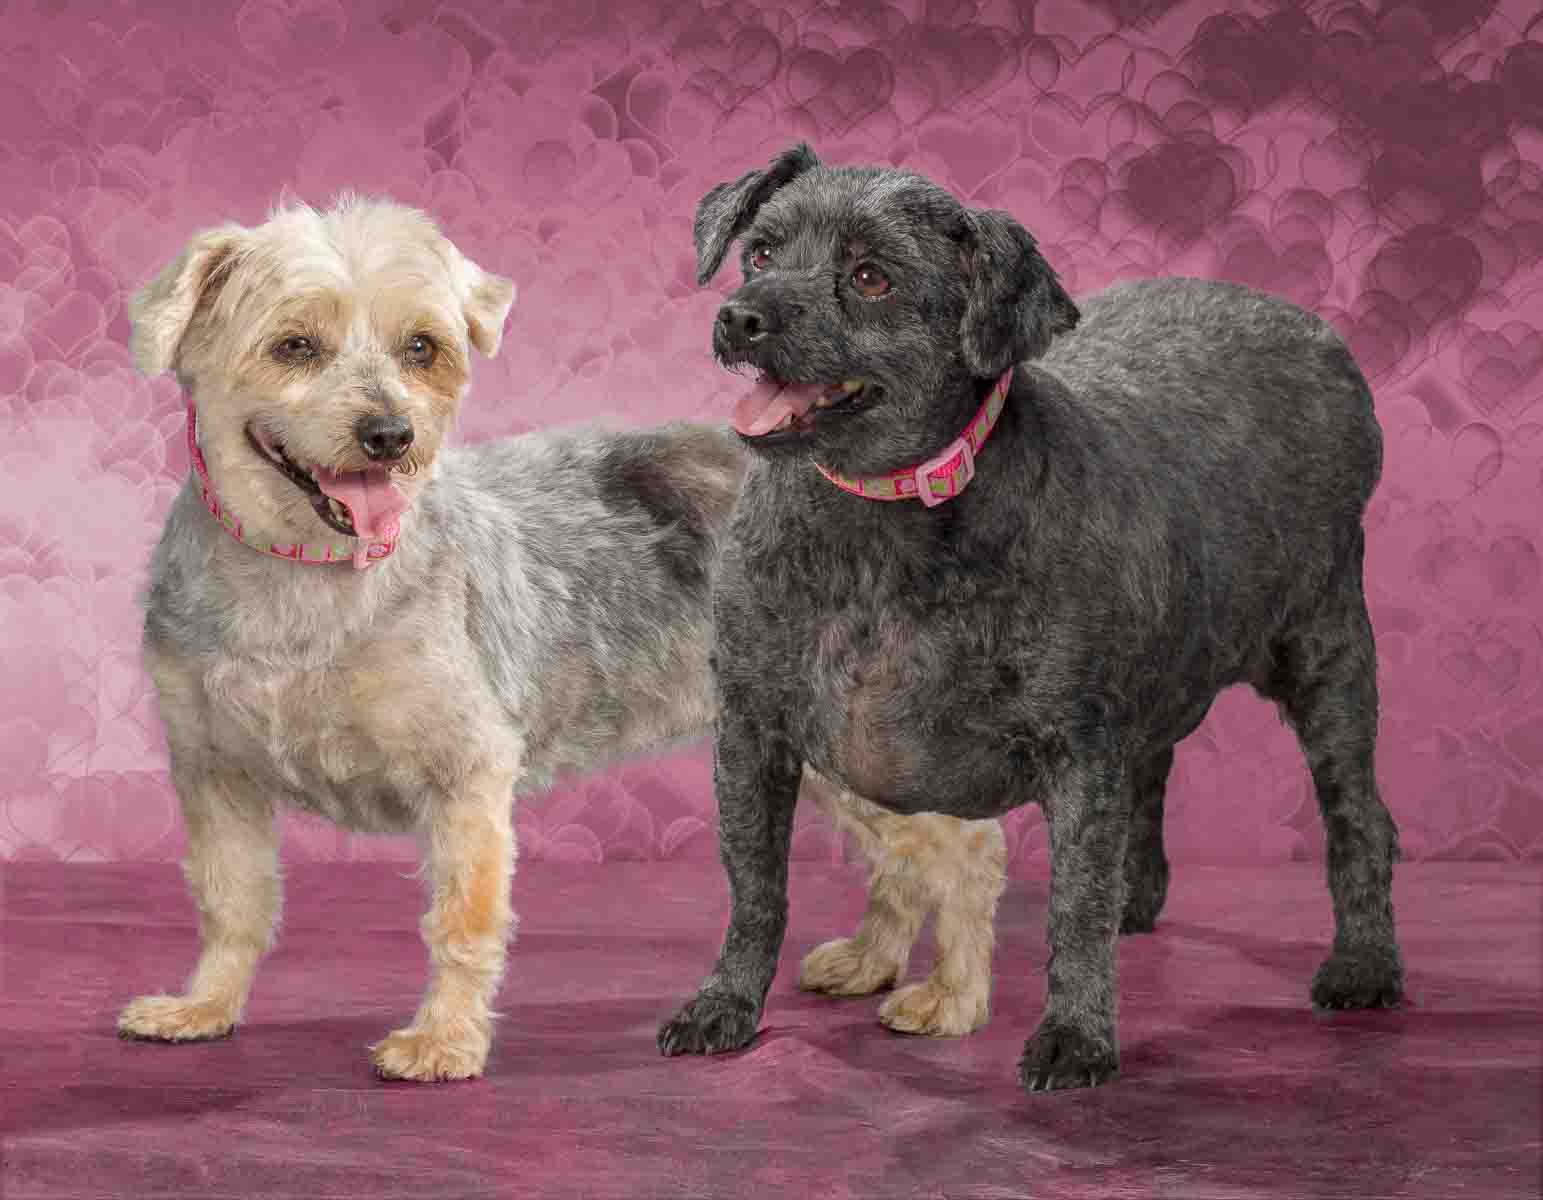 Two dogs standing next to each other on a pink background.